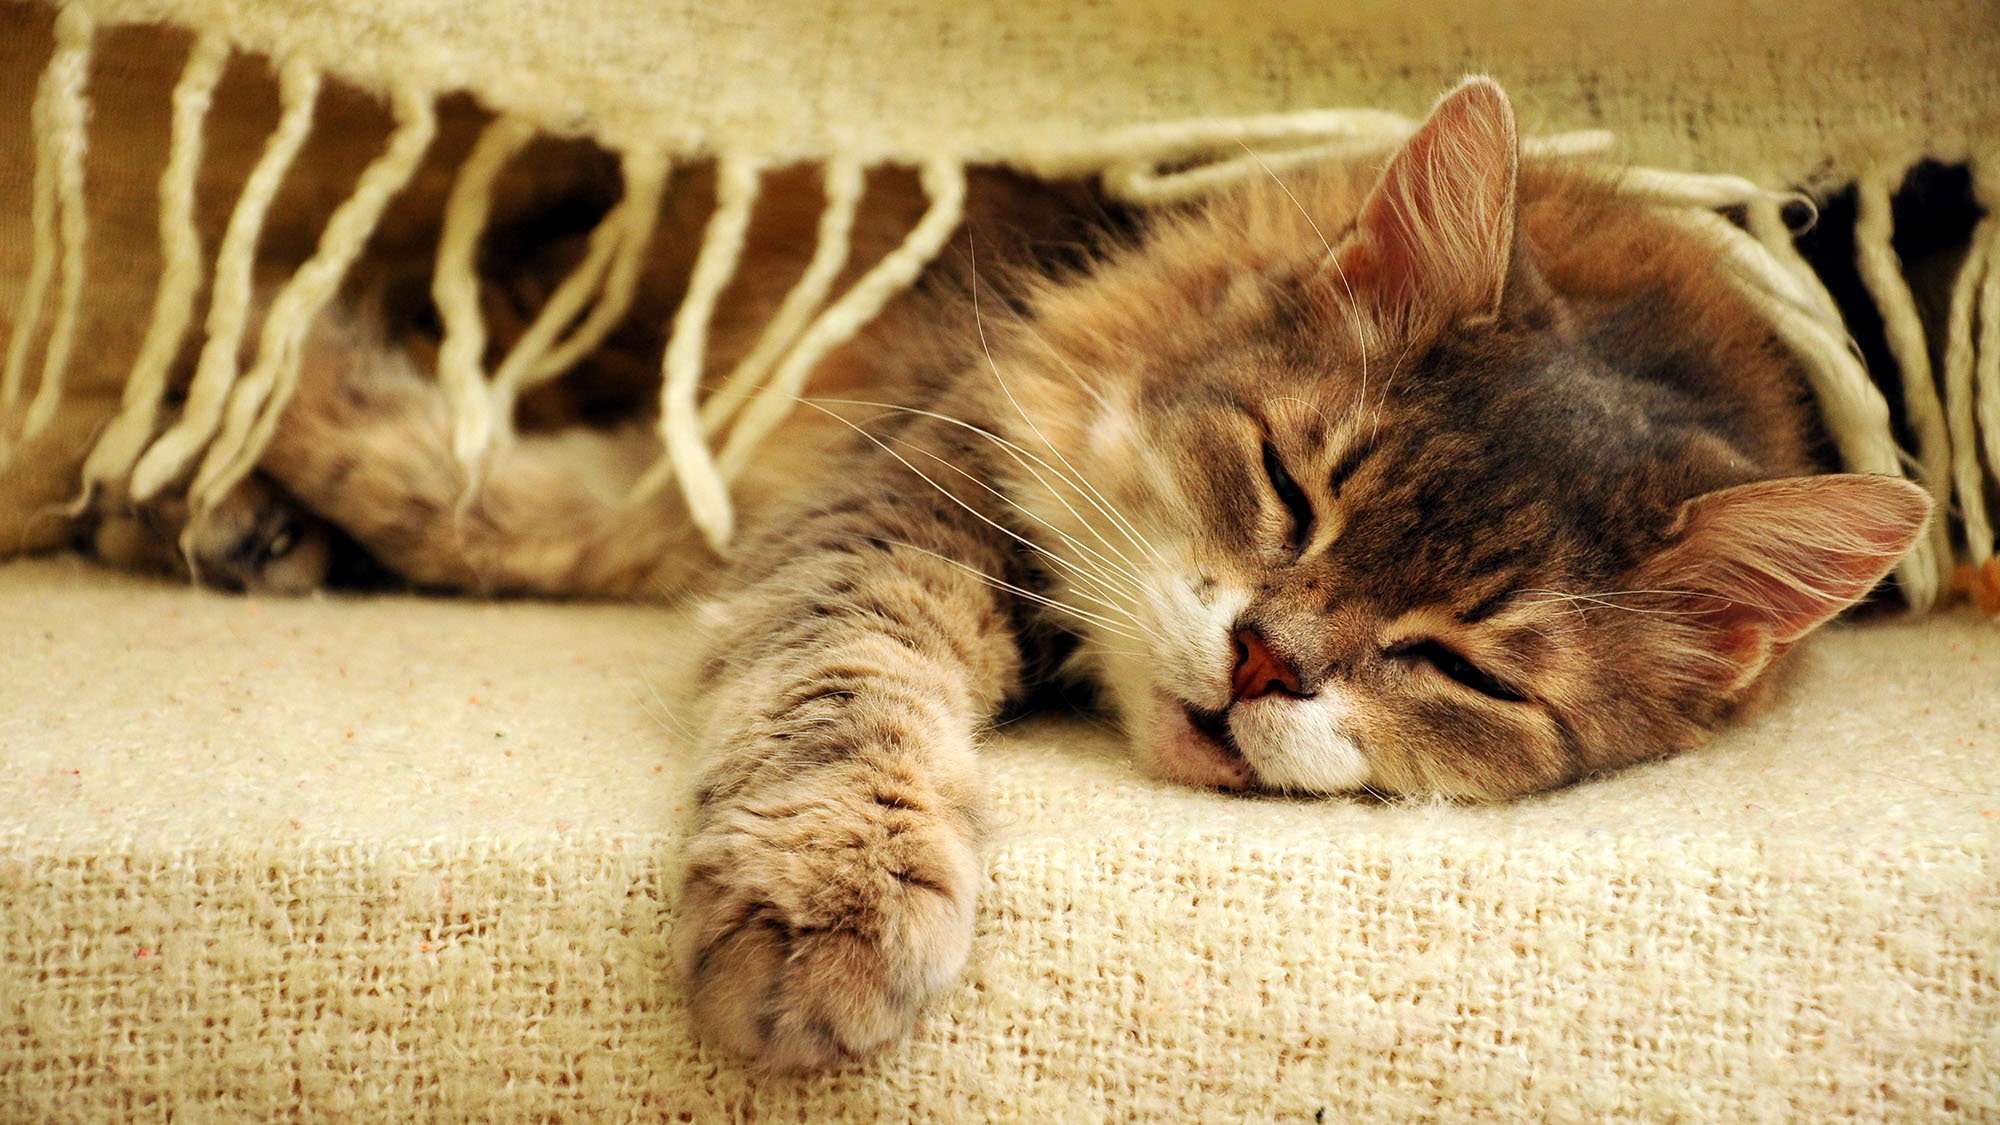 The mystery behind why cats really purr